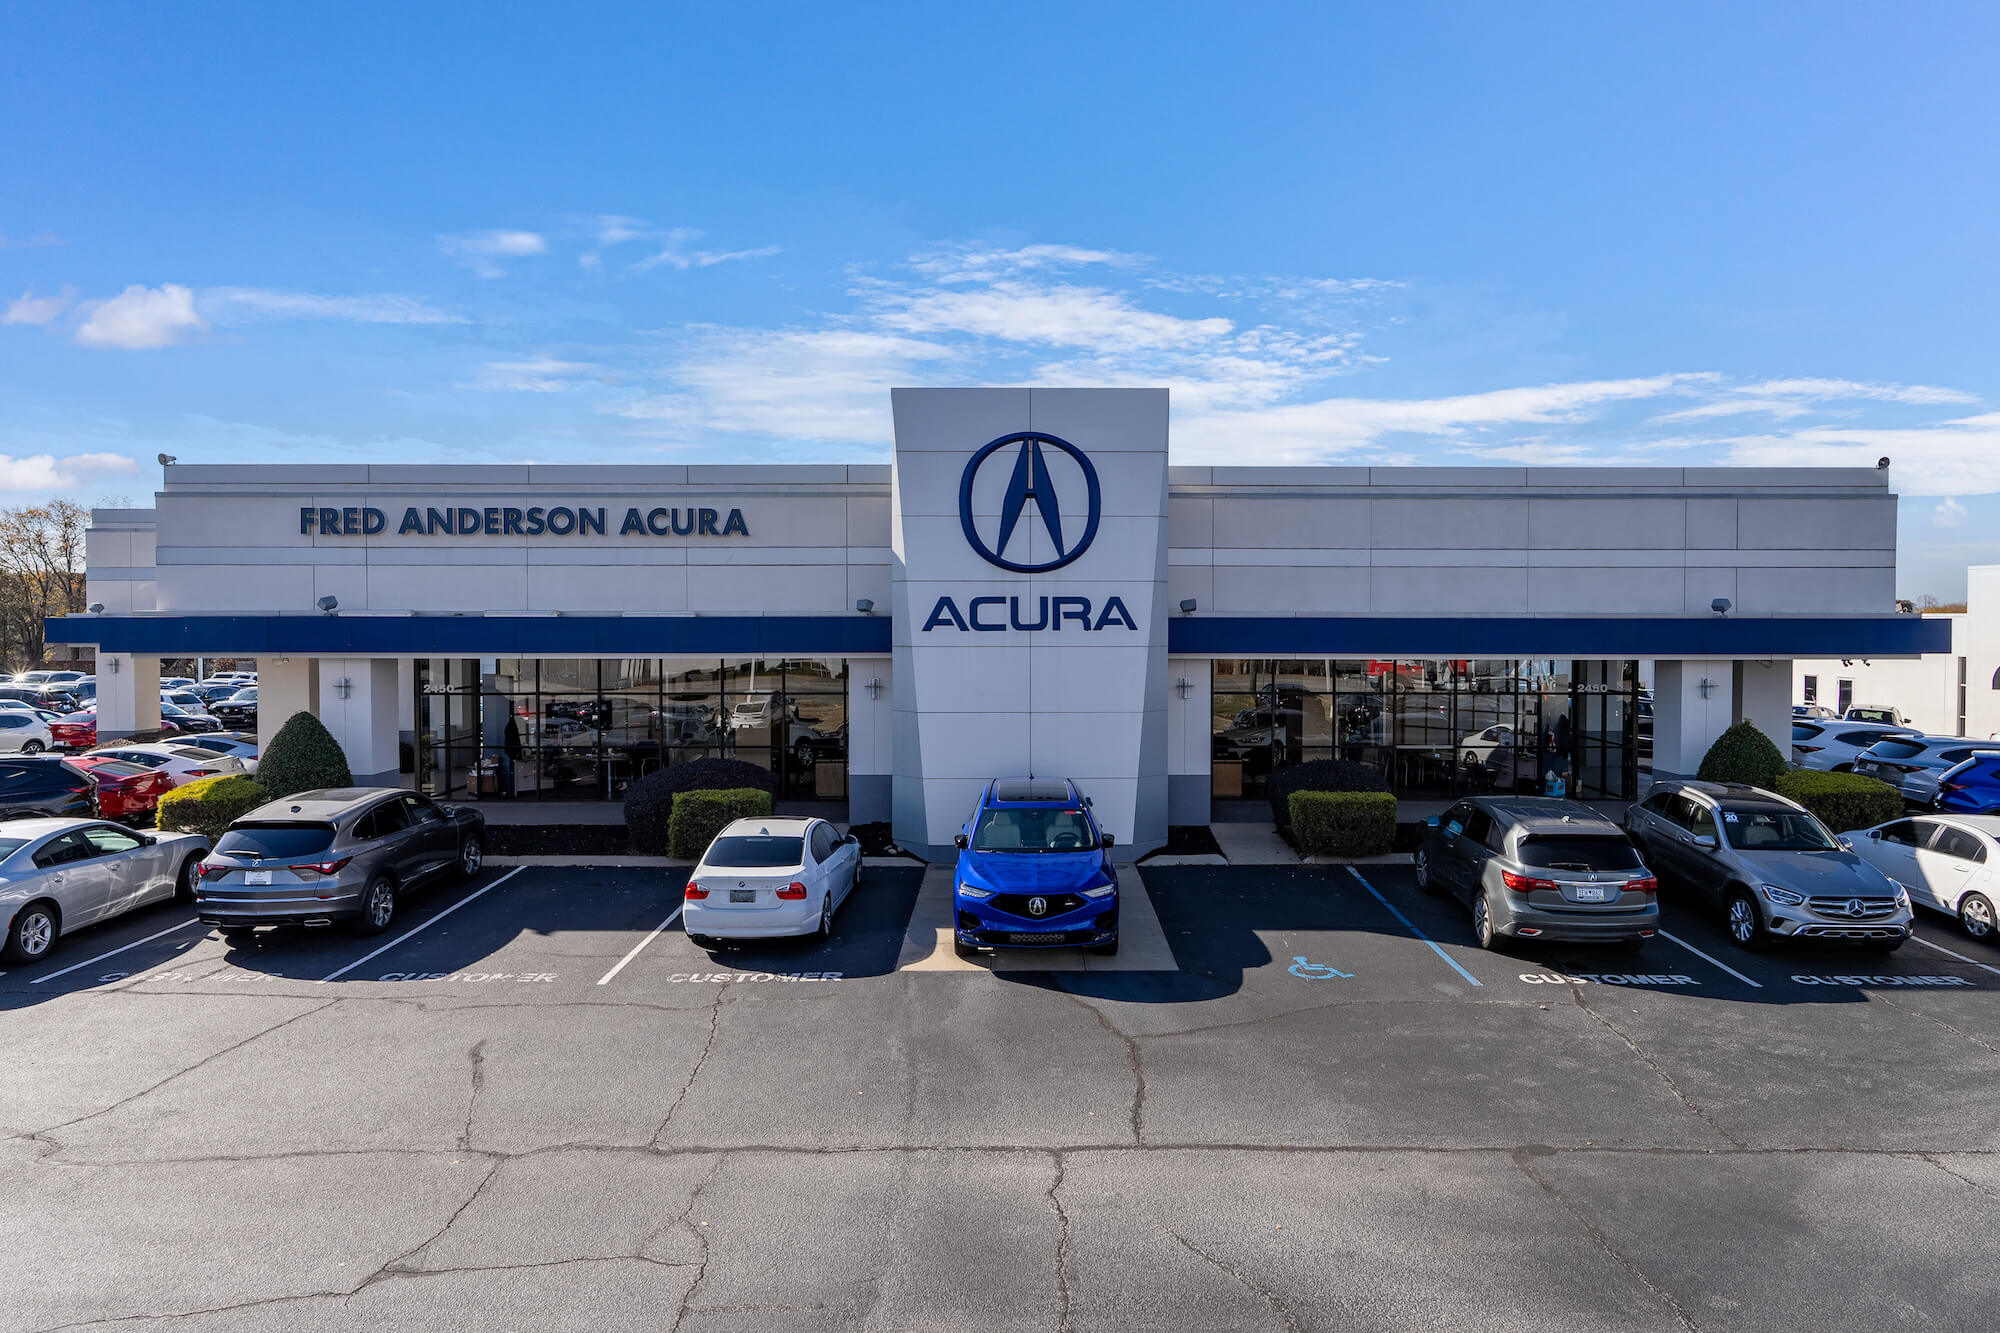  Fred Anderson Acura From The Outside